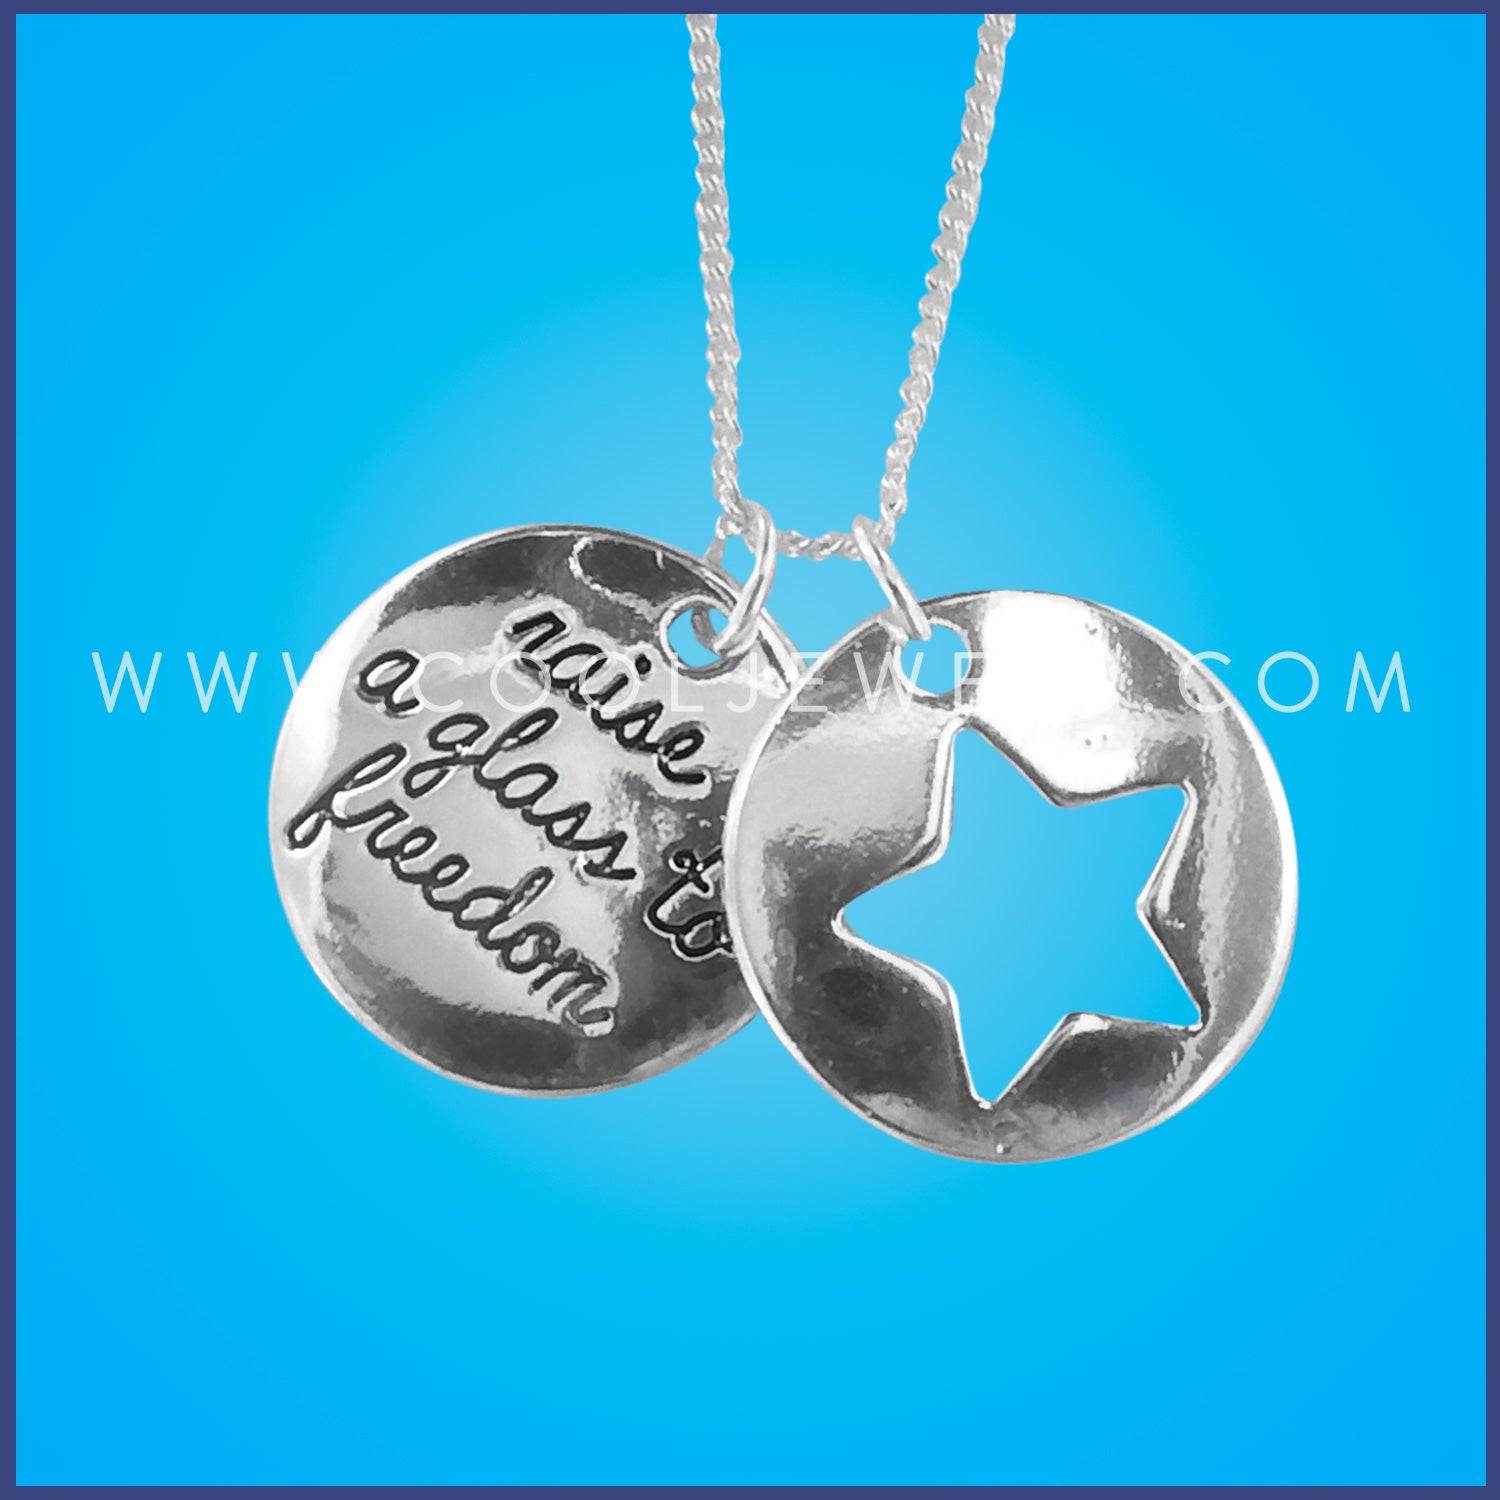 NECKLACE WITH STAR PENDANT WITH "RAISE A GLASS TO FREEDOM"